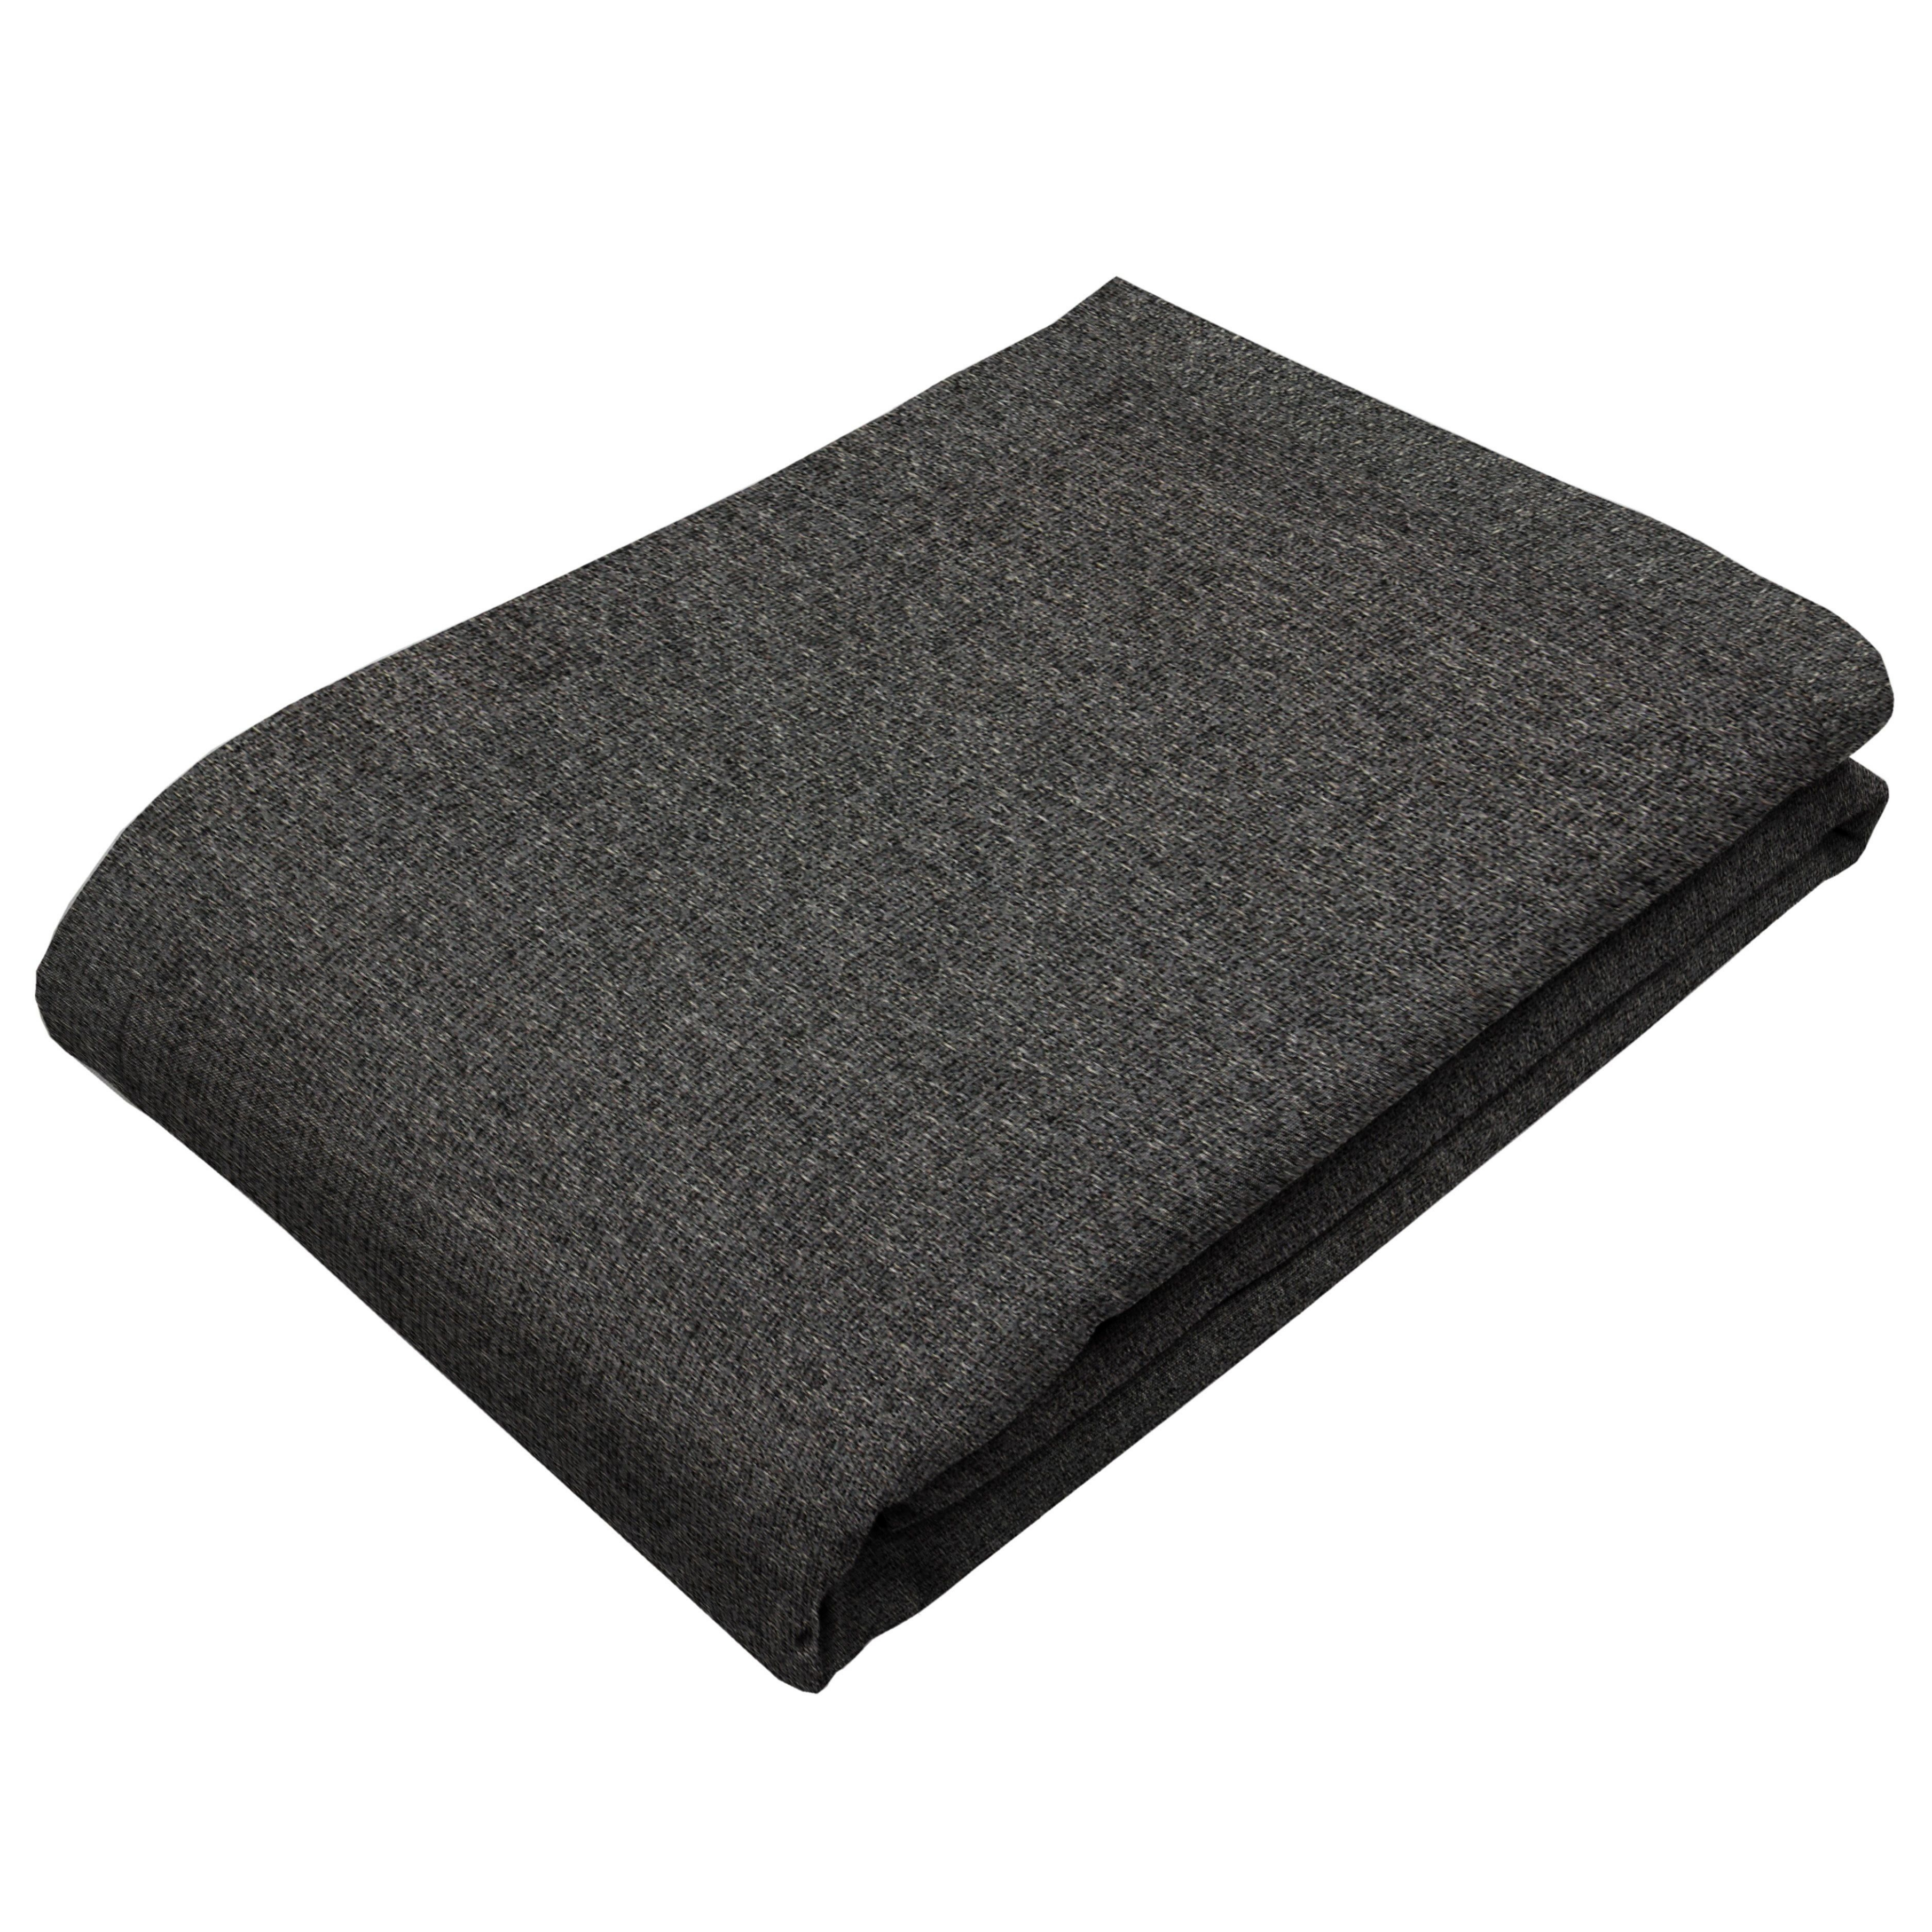 McAlister Textiles Highlands Charcoal Grey Throws & Runners Throws and Runners Bed Runner (50cm x 240cm) 